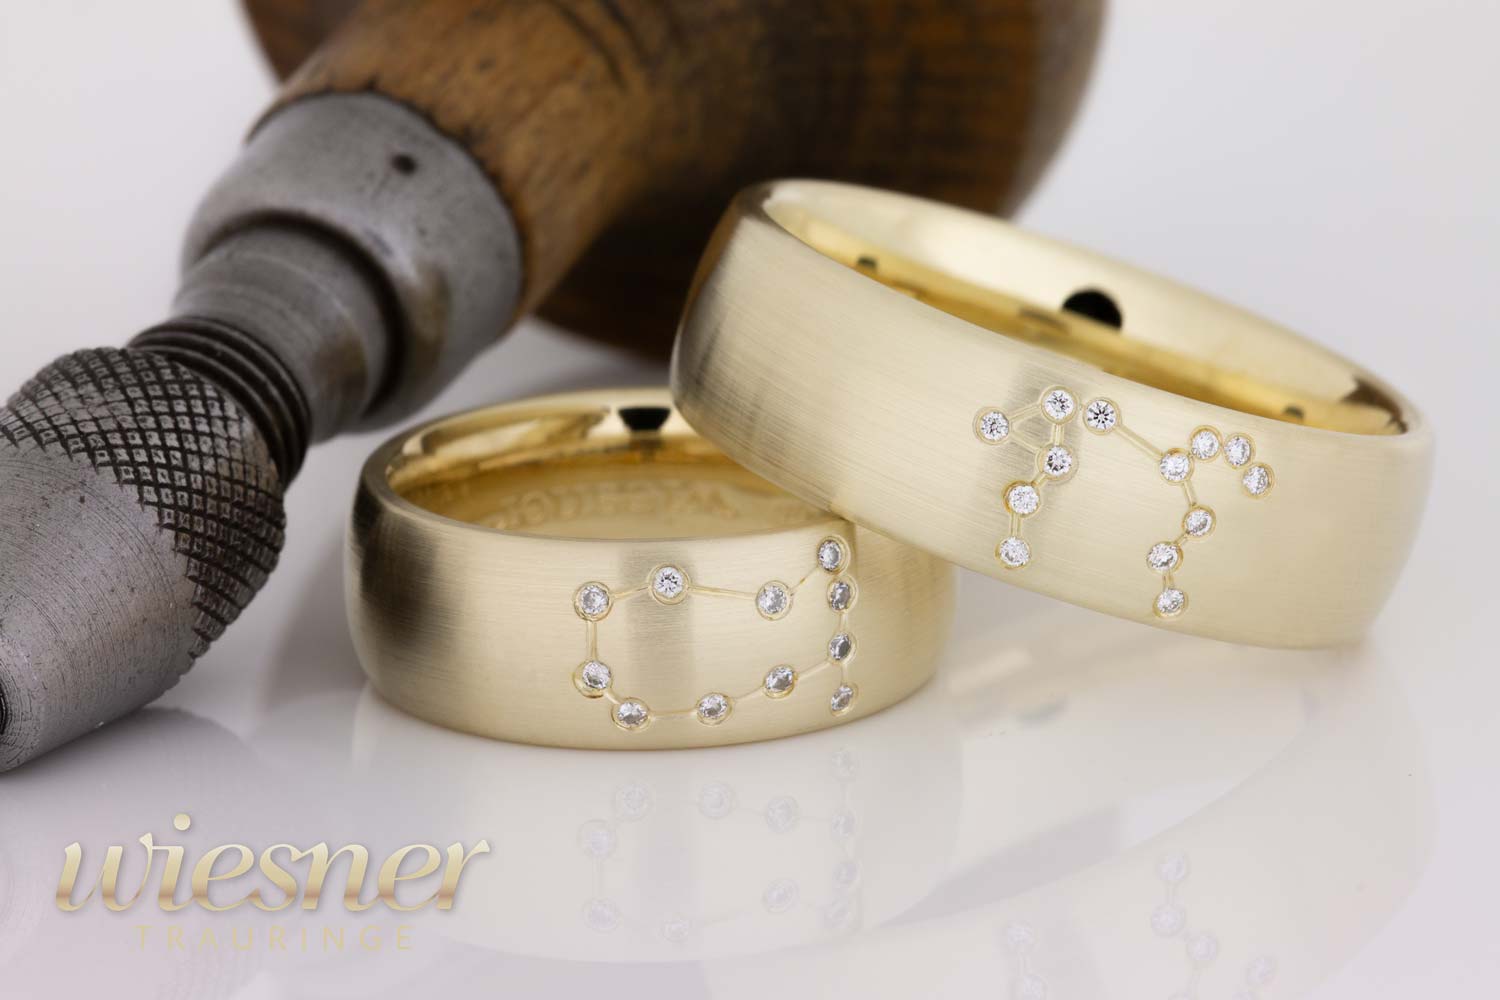 Special wedding rings with zodiac sign Taurus and Gemini